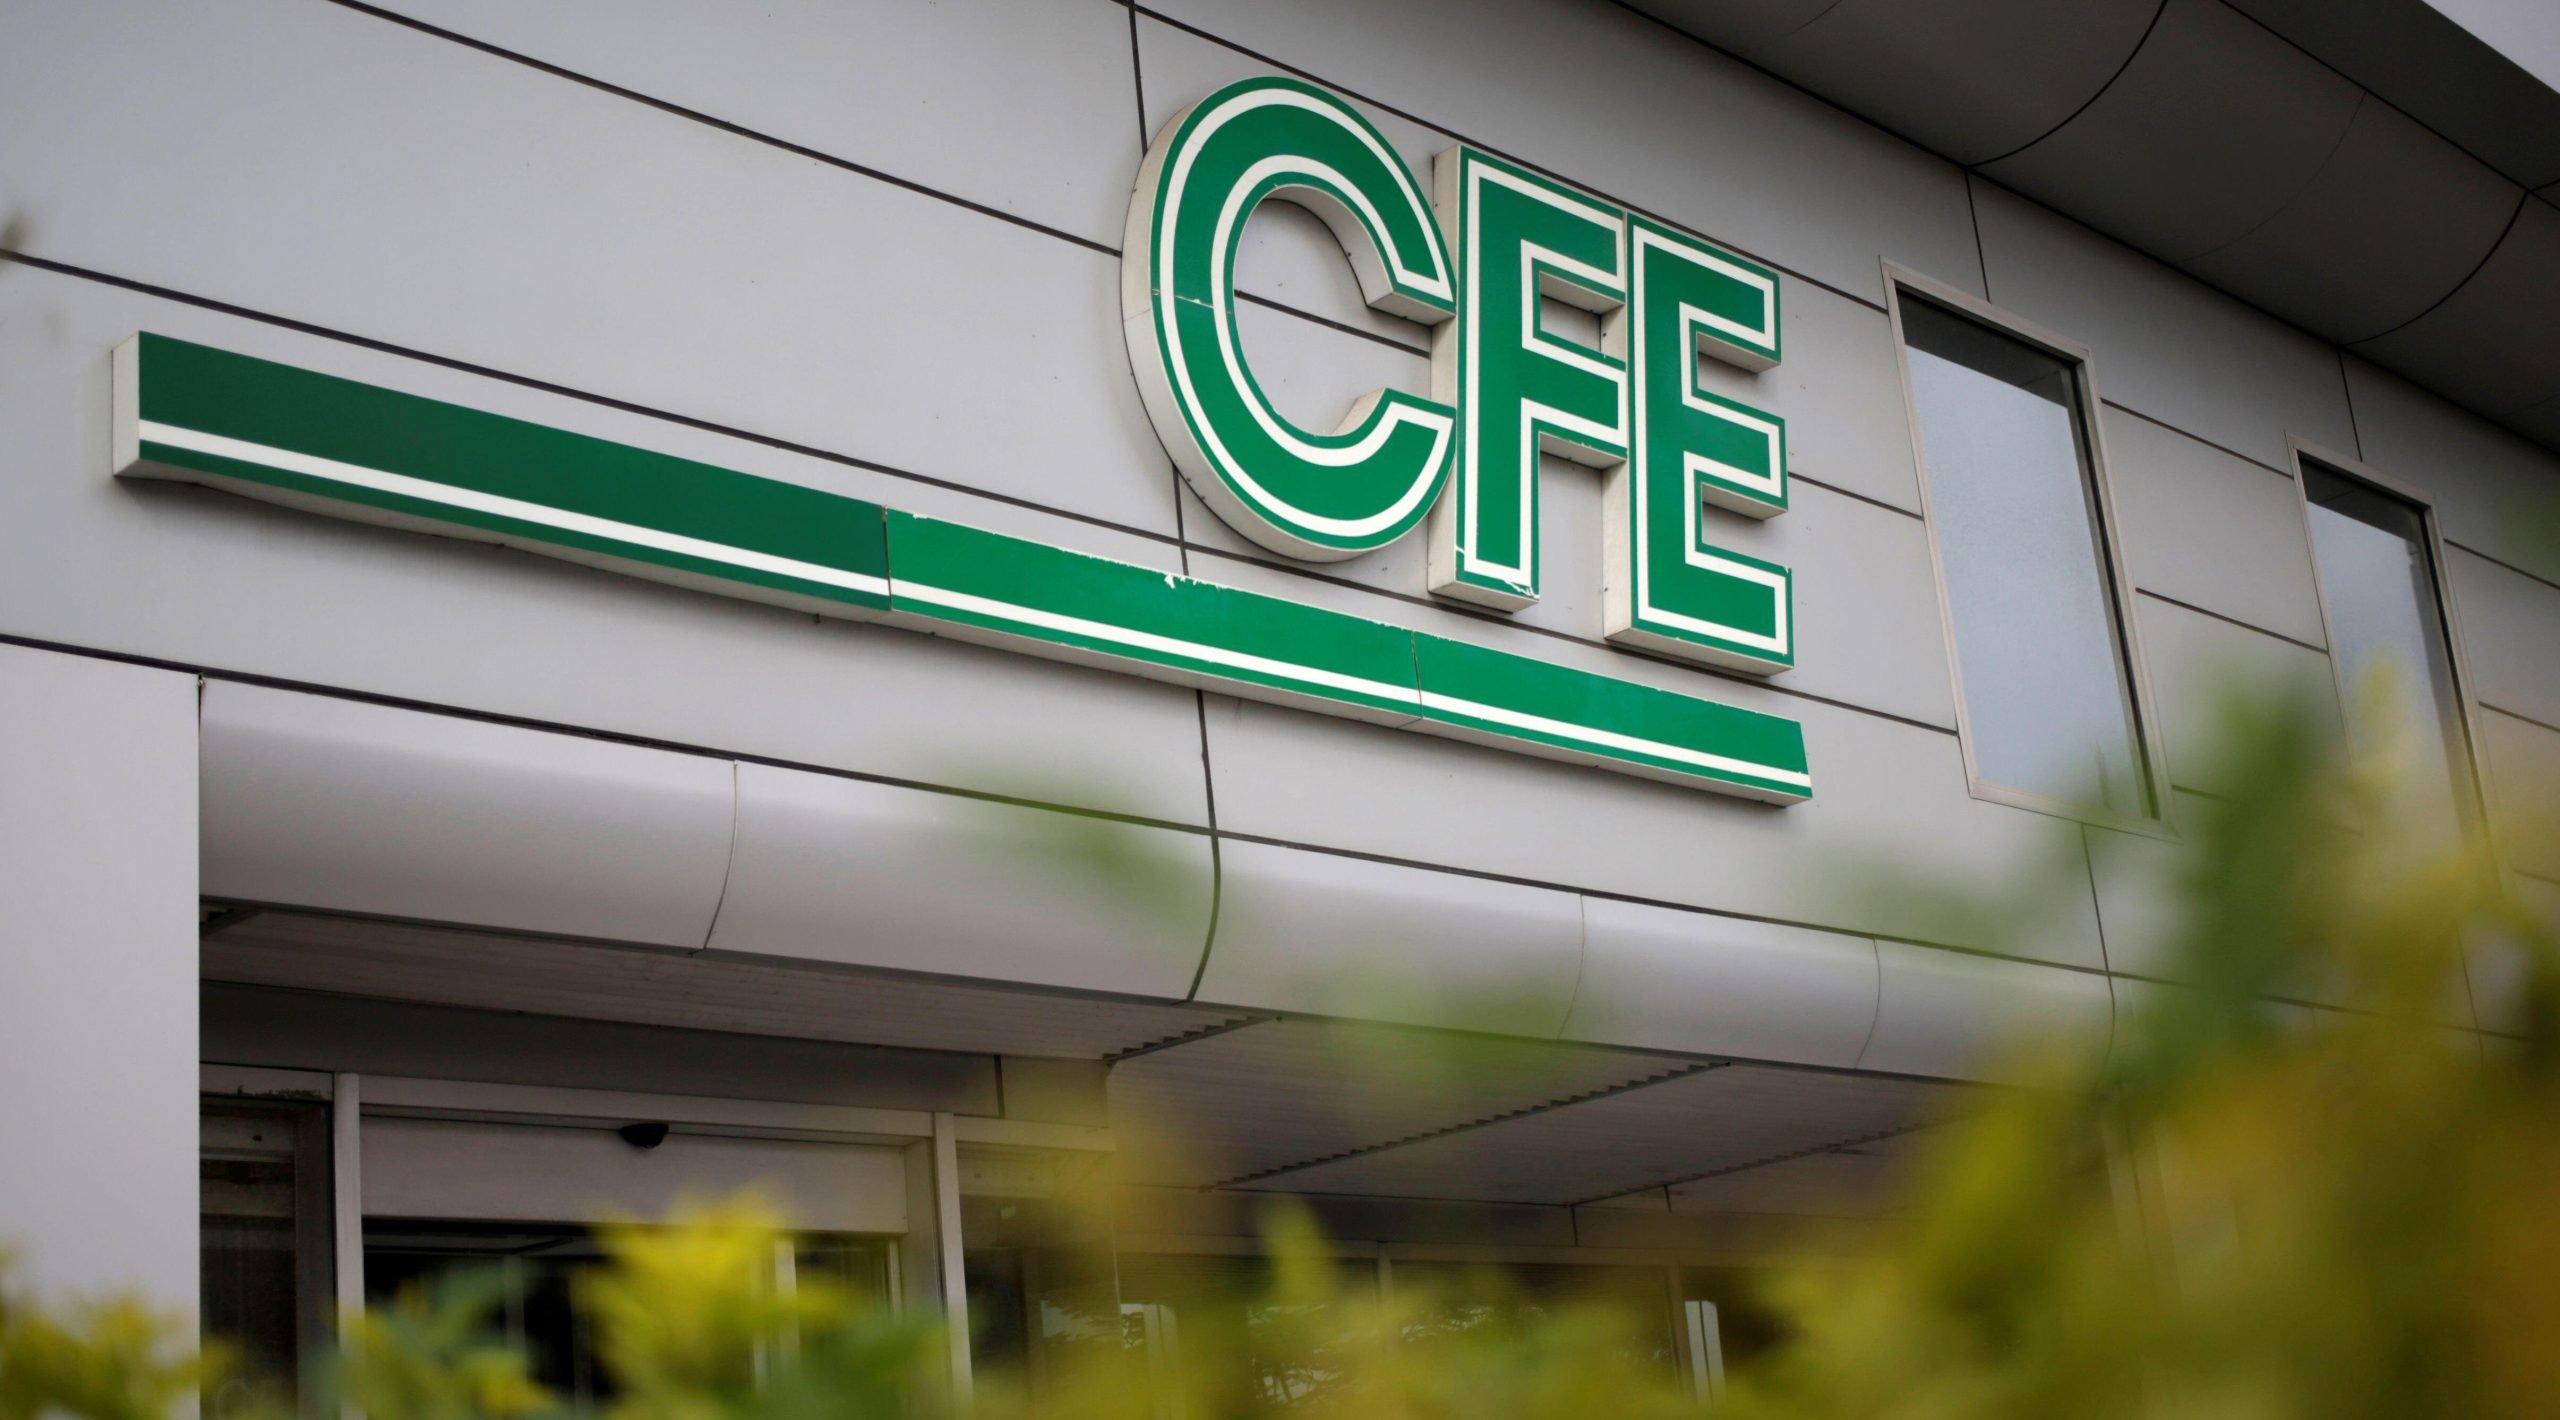 cfe logo on a building